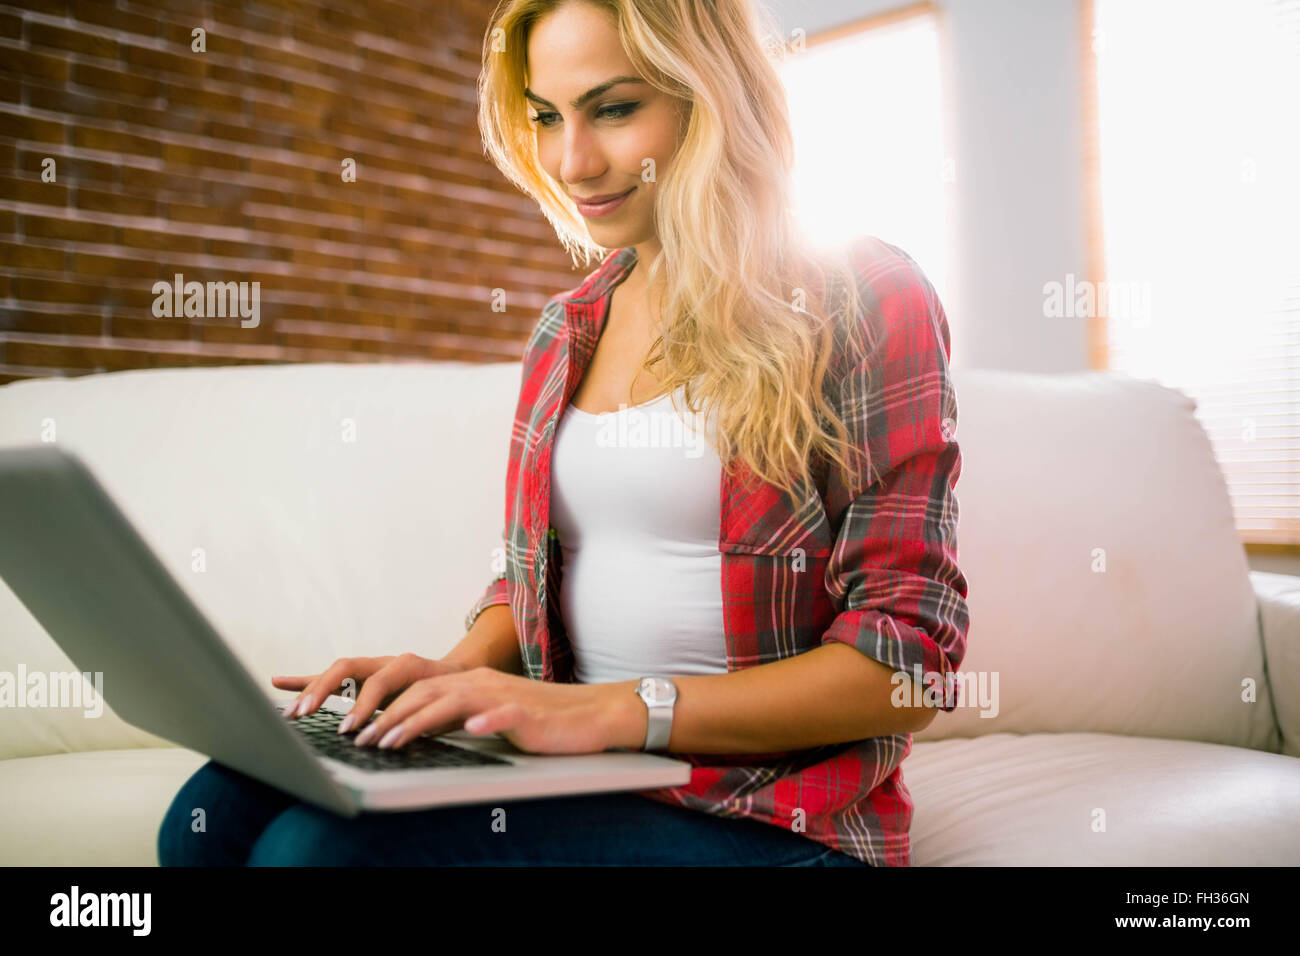 Pretty blonde using laptop on couch Stock Photo